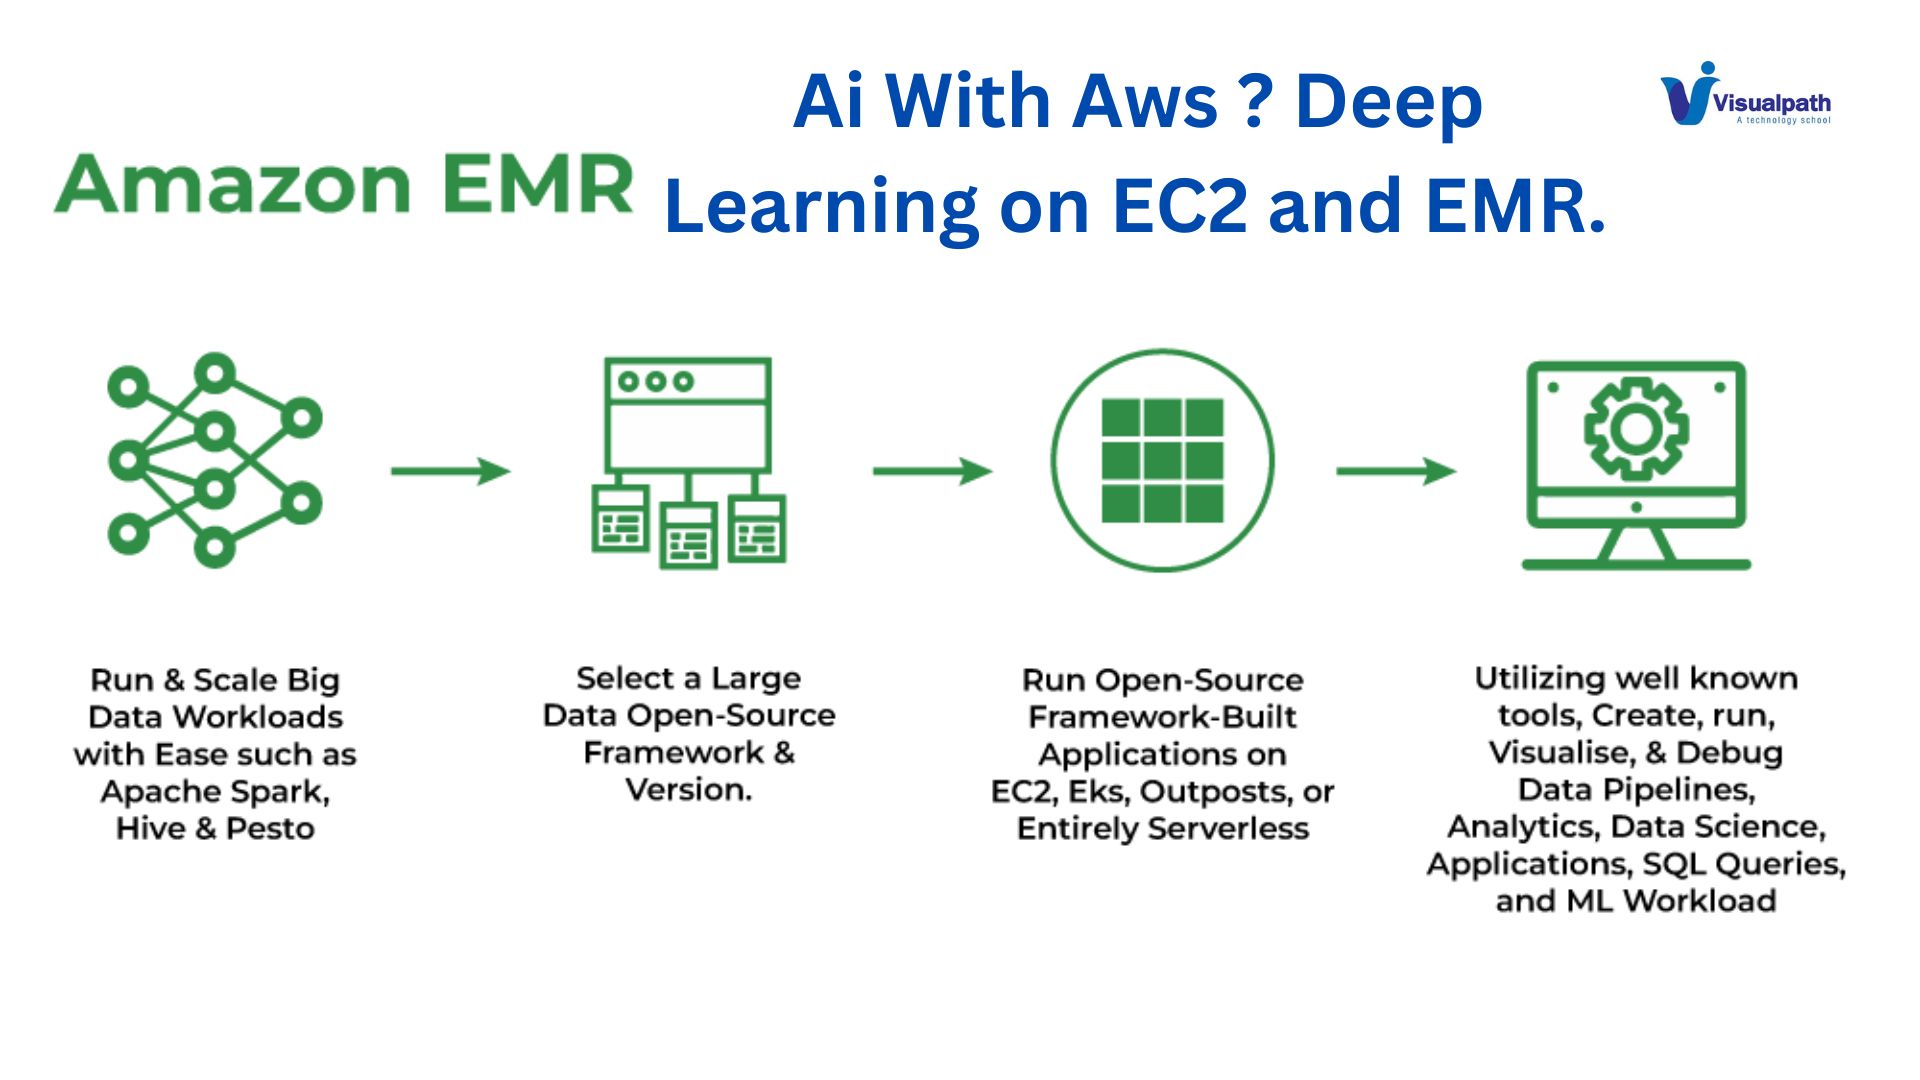 AI with AWS? Deep Learning on EC2 and EMR